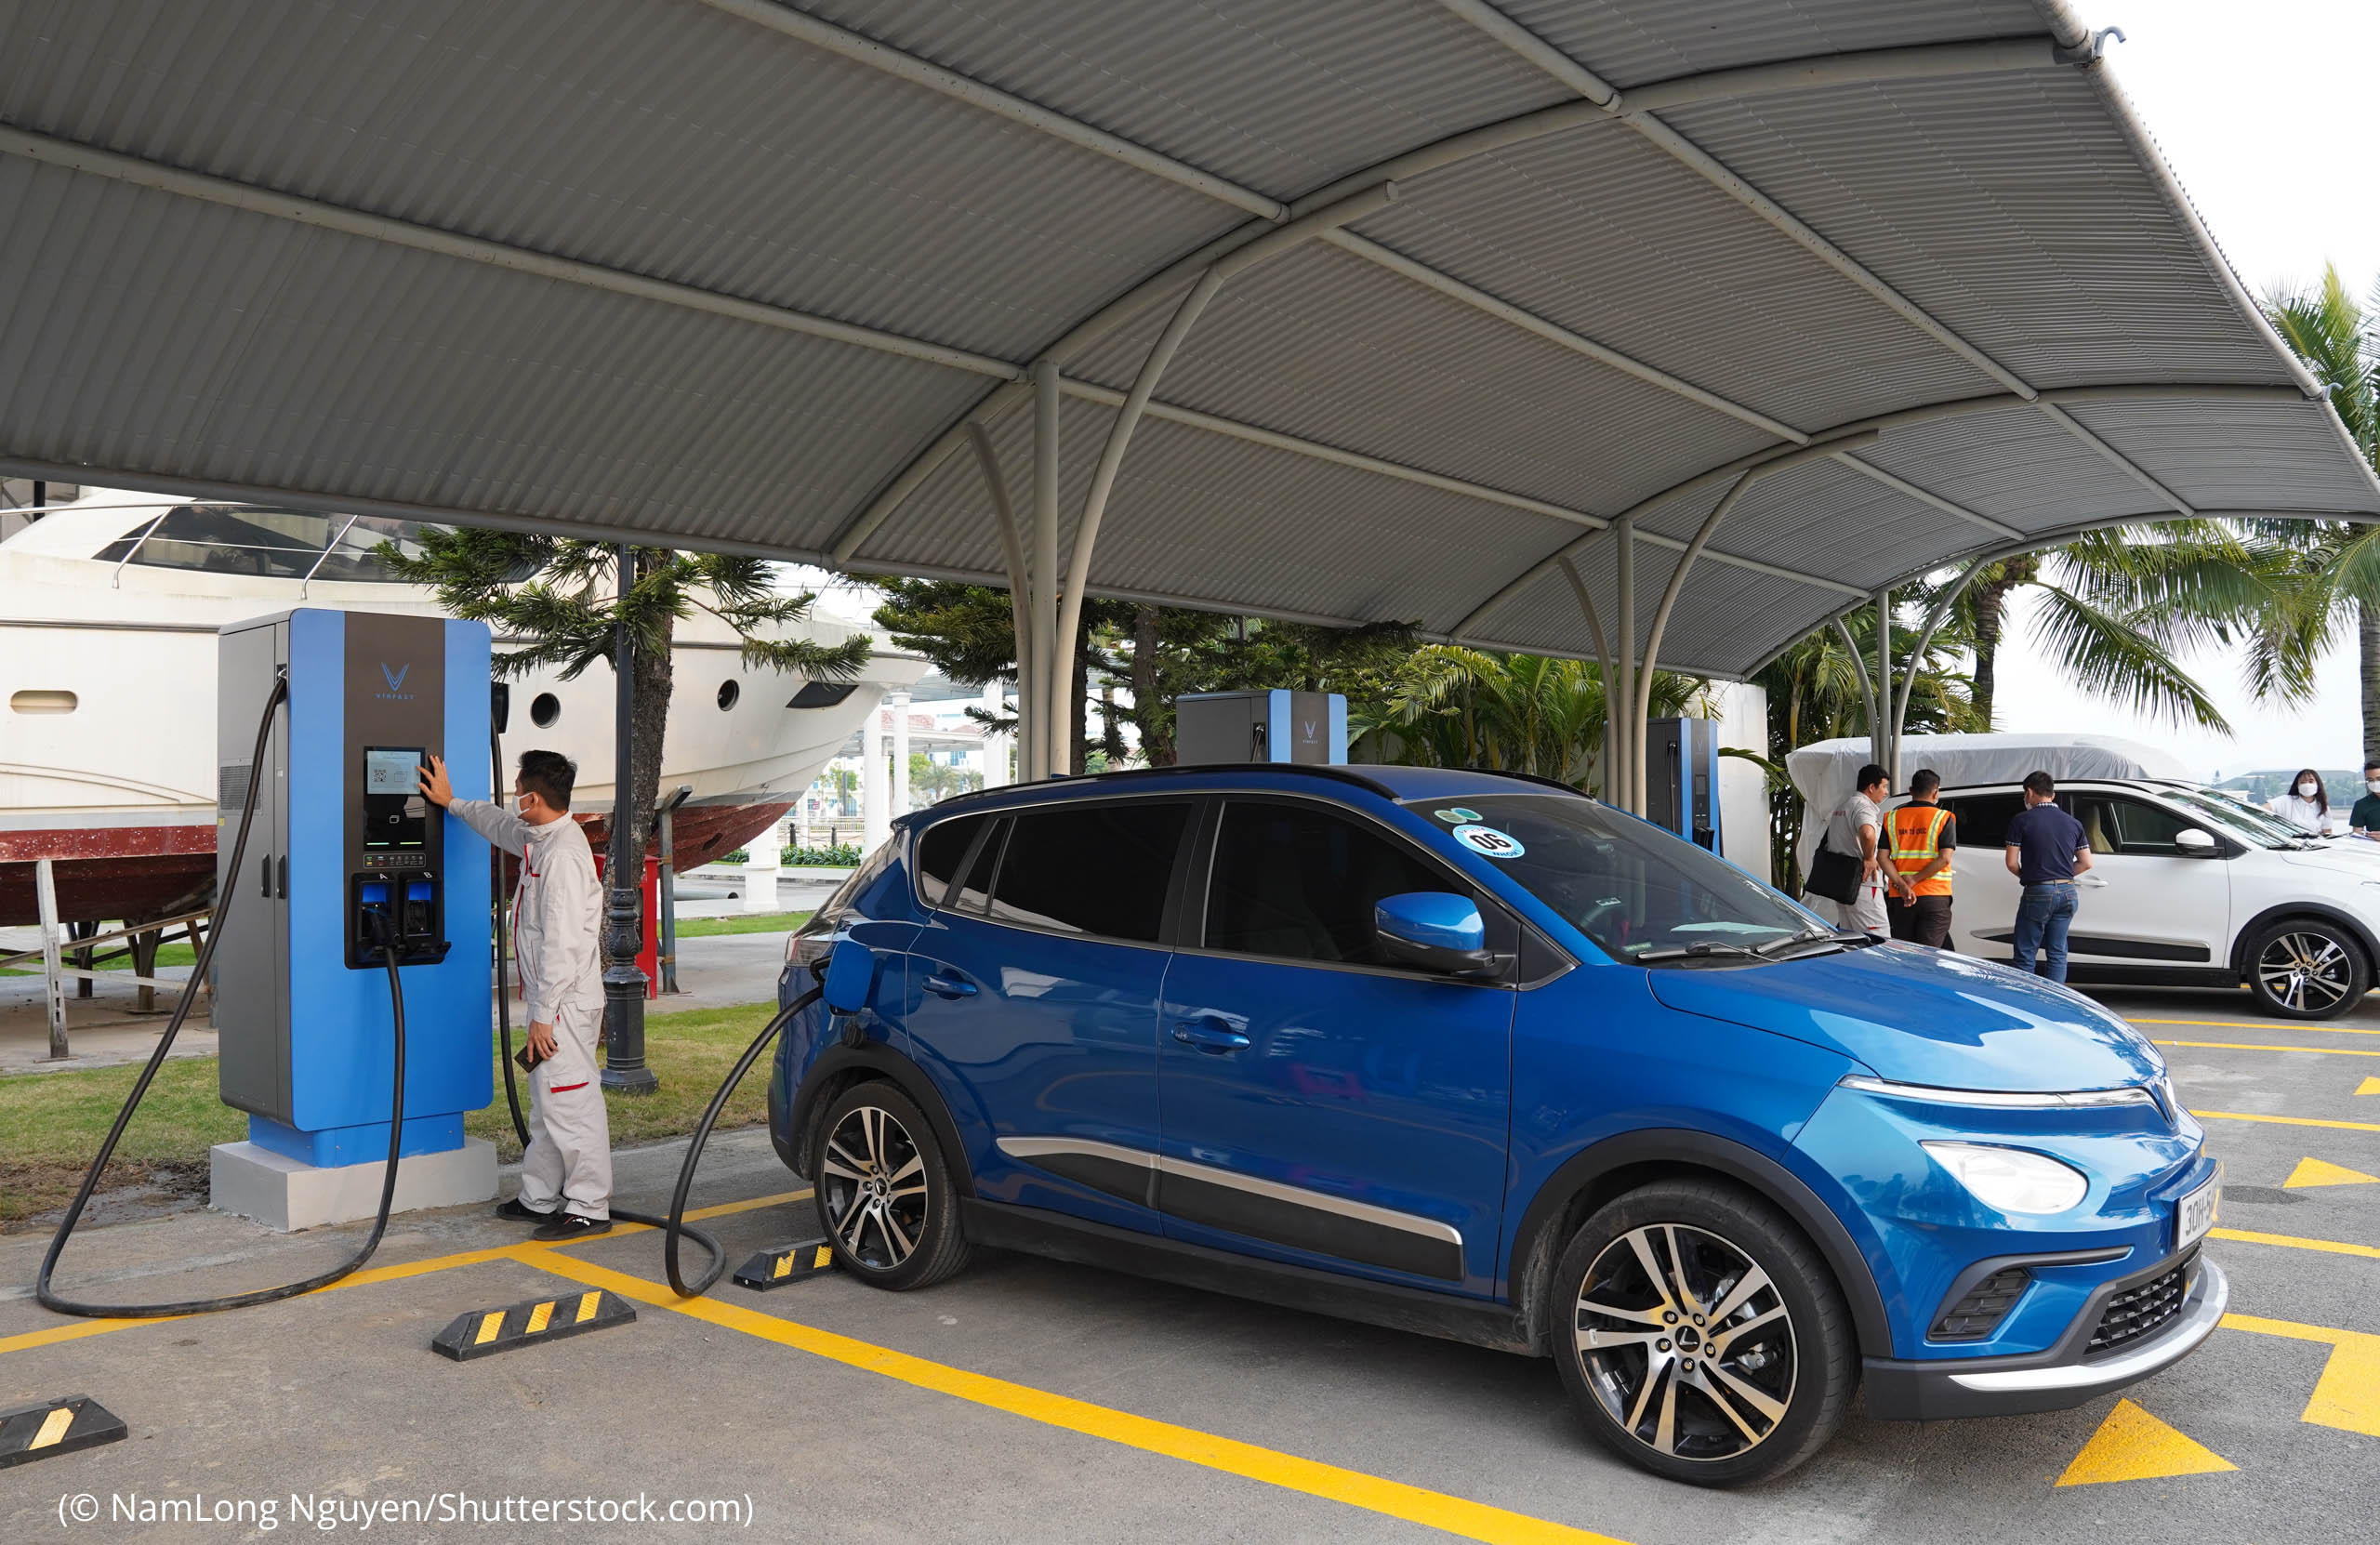 Electric vehicles charging at charging station with people beside them (© NamLong Nguyen/Shutterstock.com)